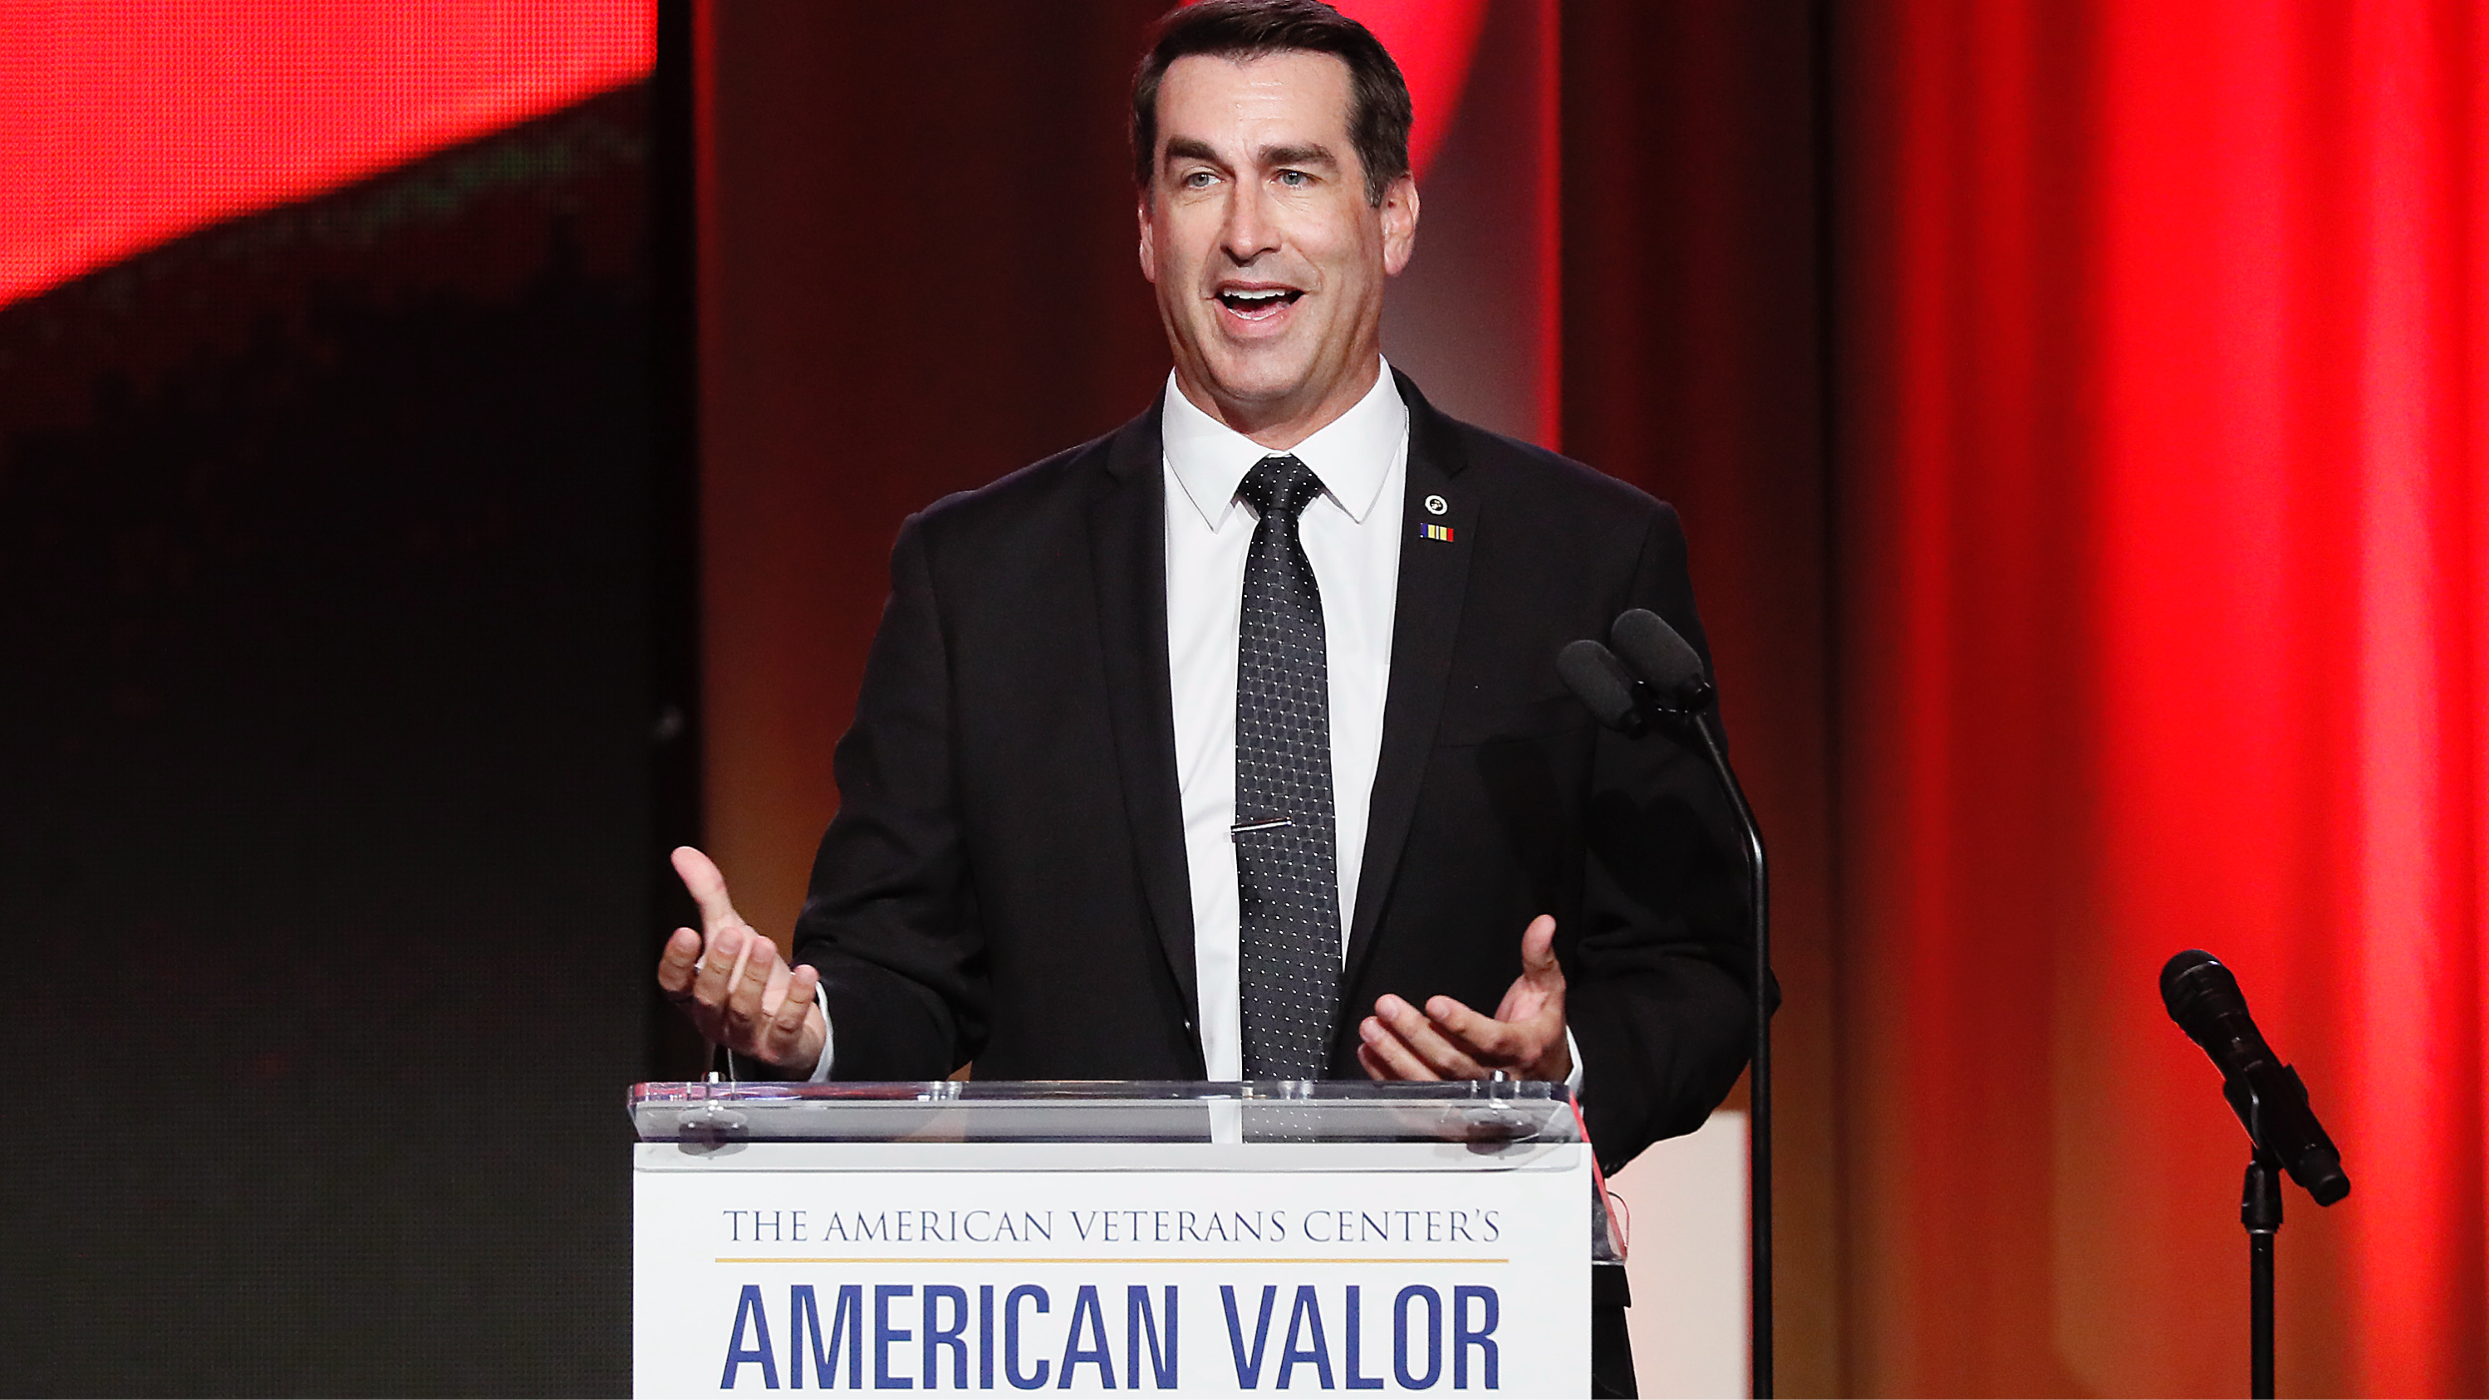 WASHINGTON, DC - OCTOBER 26: Actor/retired United States Marine Corps Reserve officer Rob Riggle speaks at the American Veterans Center’s "2019 American Valor: A Salute to Our Heroes" Veterans Day Special at the Omni Shoreham Hotel on October 26, 2019 in Washington, DC. (Photo by Paul Morigi/Getty Images)